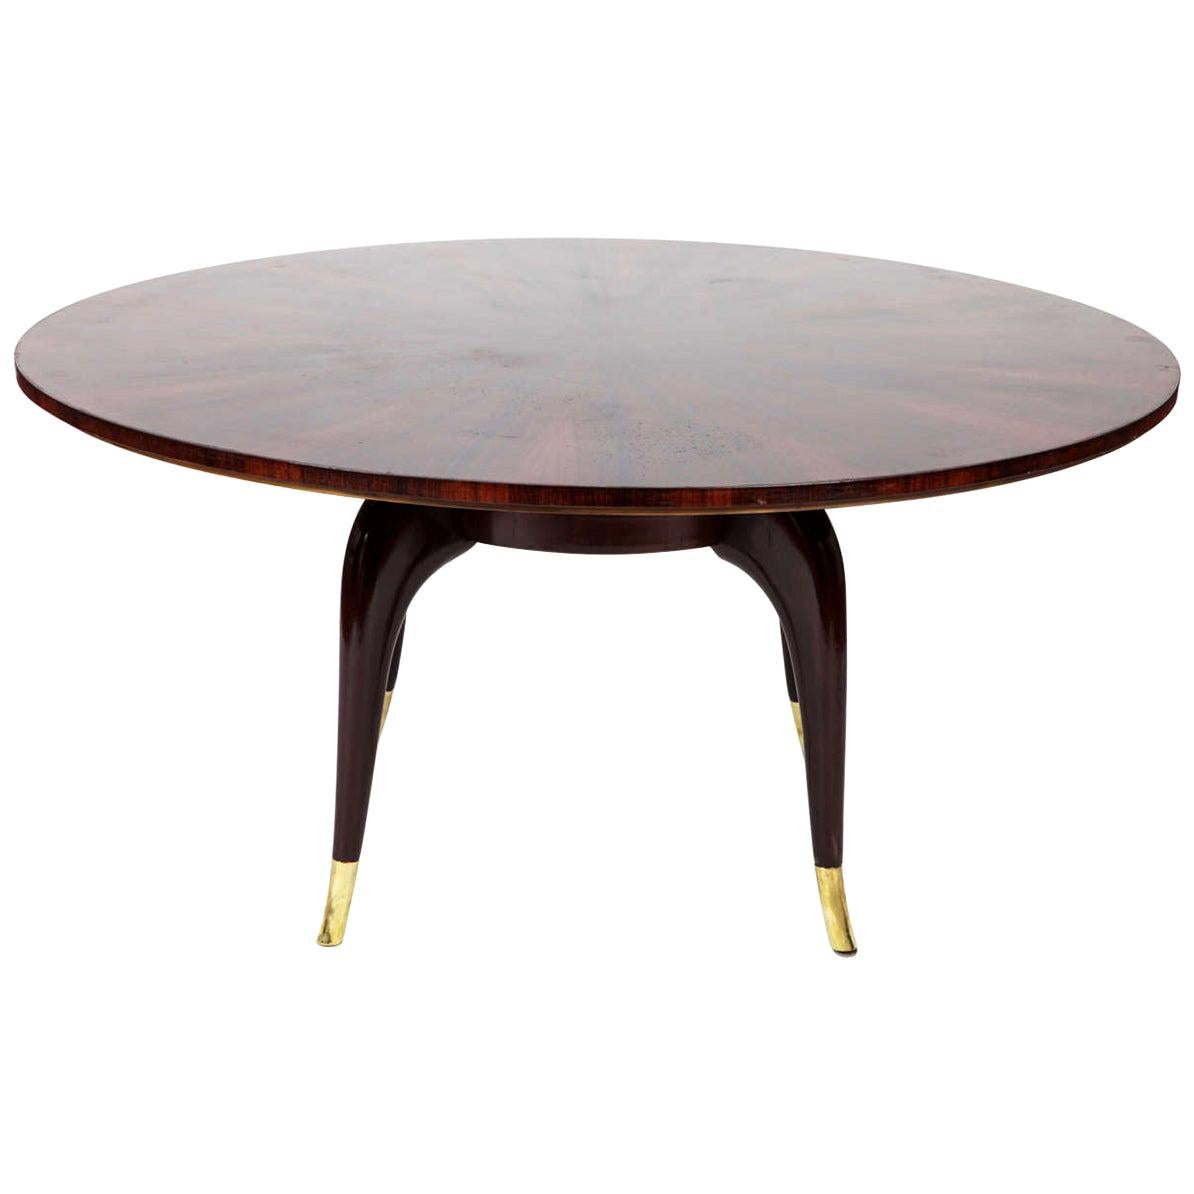 Rare Large Round Mahogany Coffee Table Attributed to Paolo Buffa, 1940